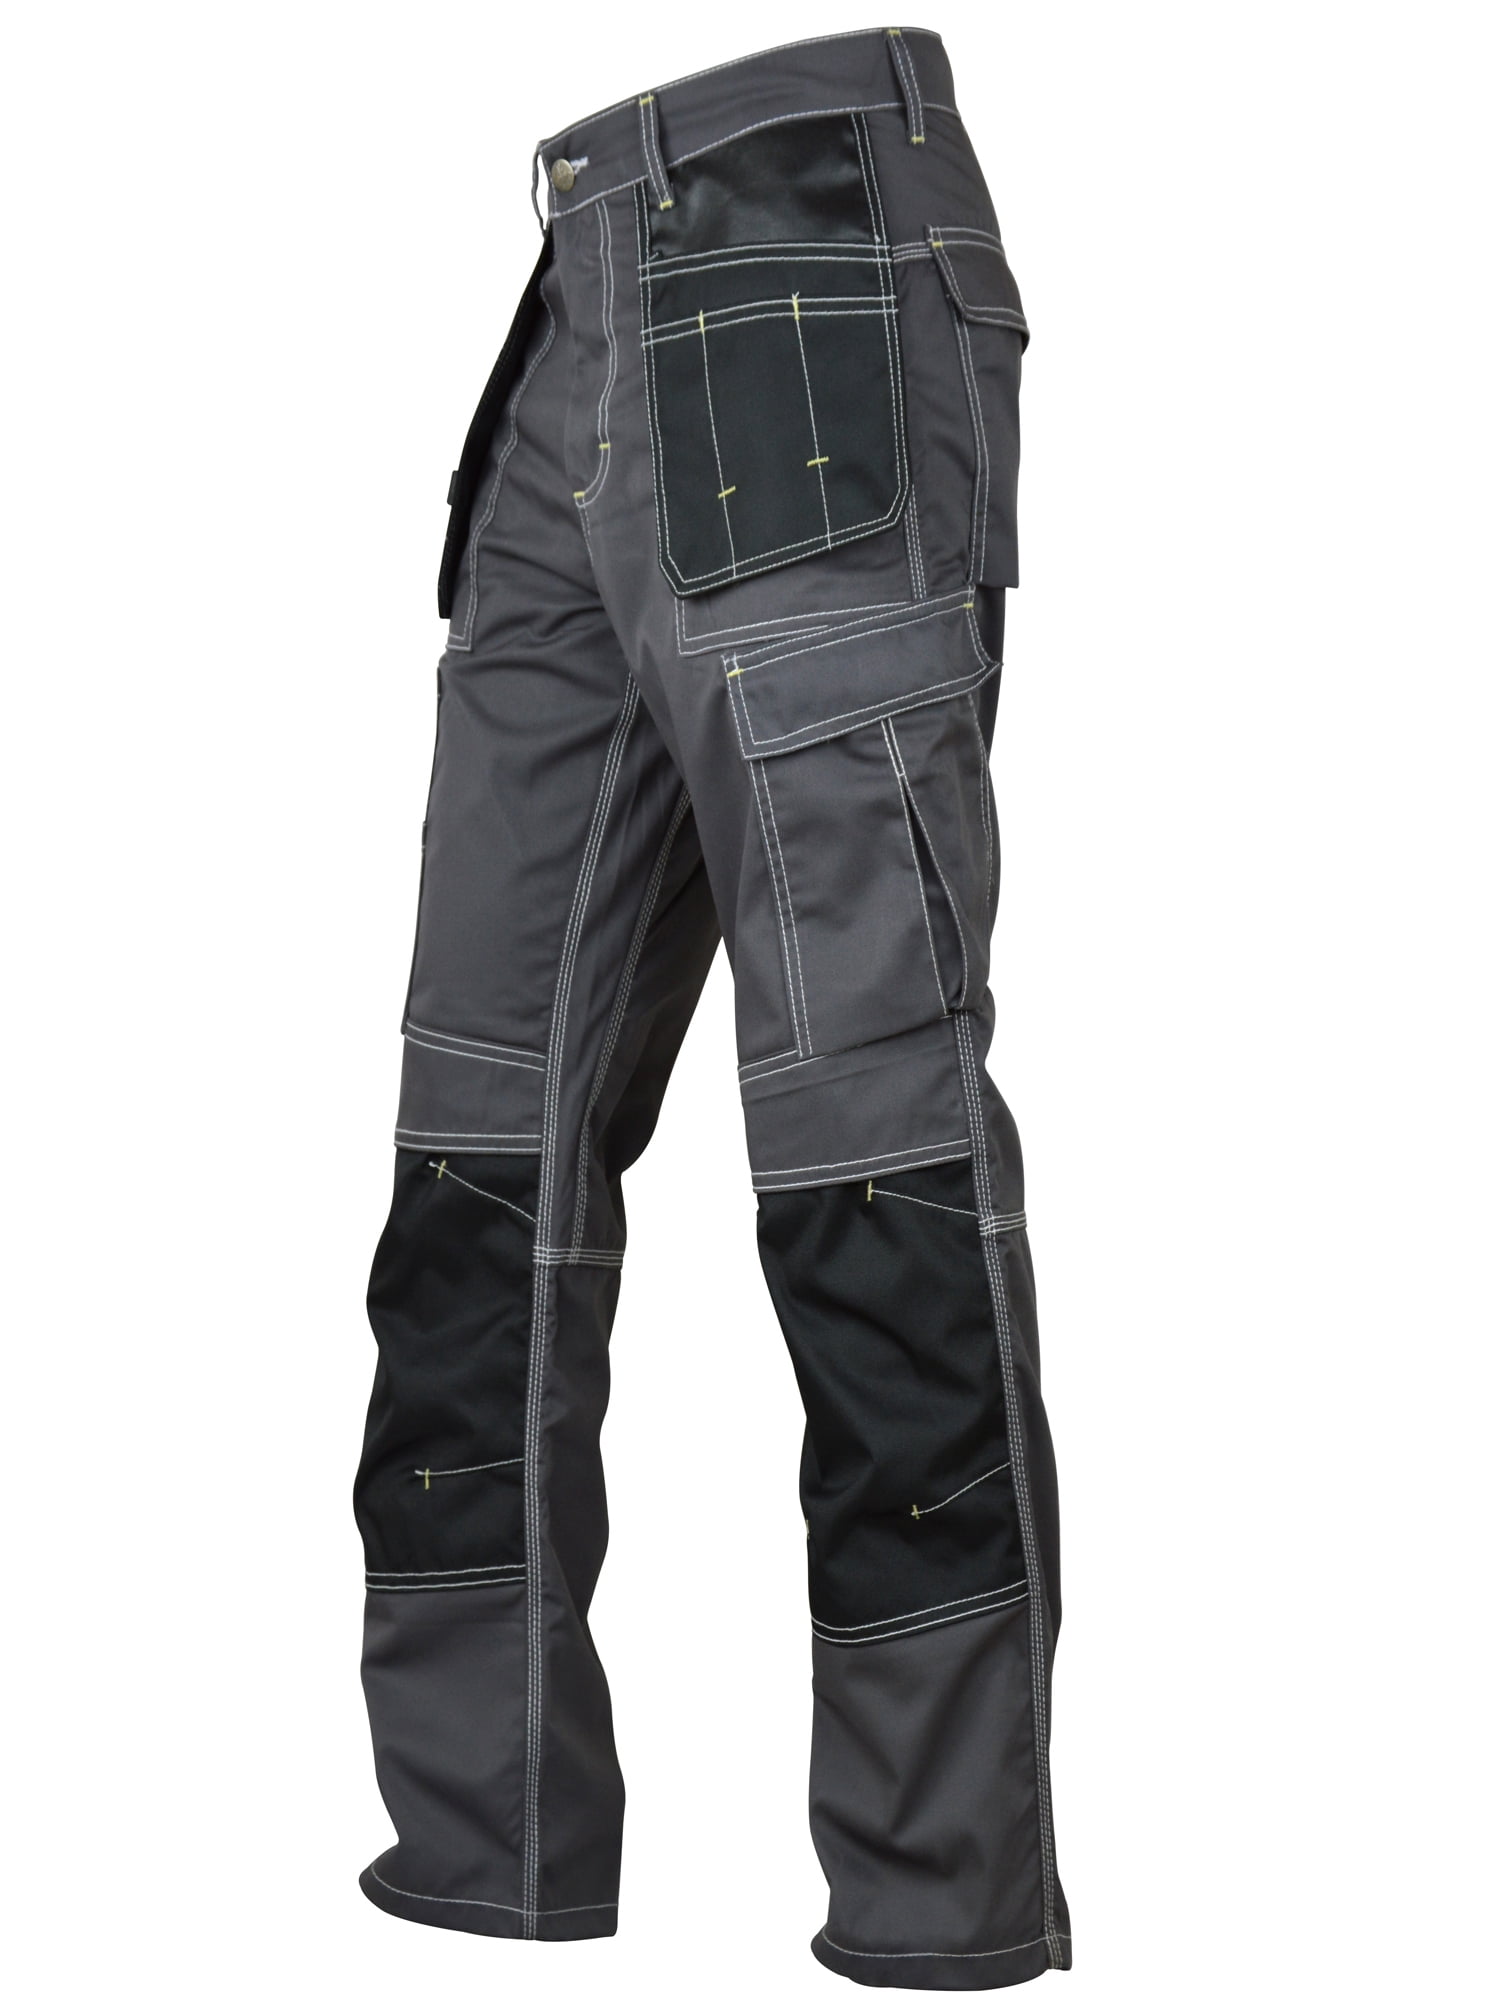 MENS CARGO COMBAT WORK TROUSERS WITH KNEE PAD POCKETS WORKER HEAVY DUTY PANTS 